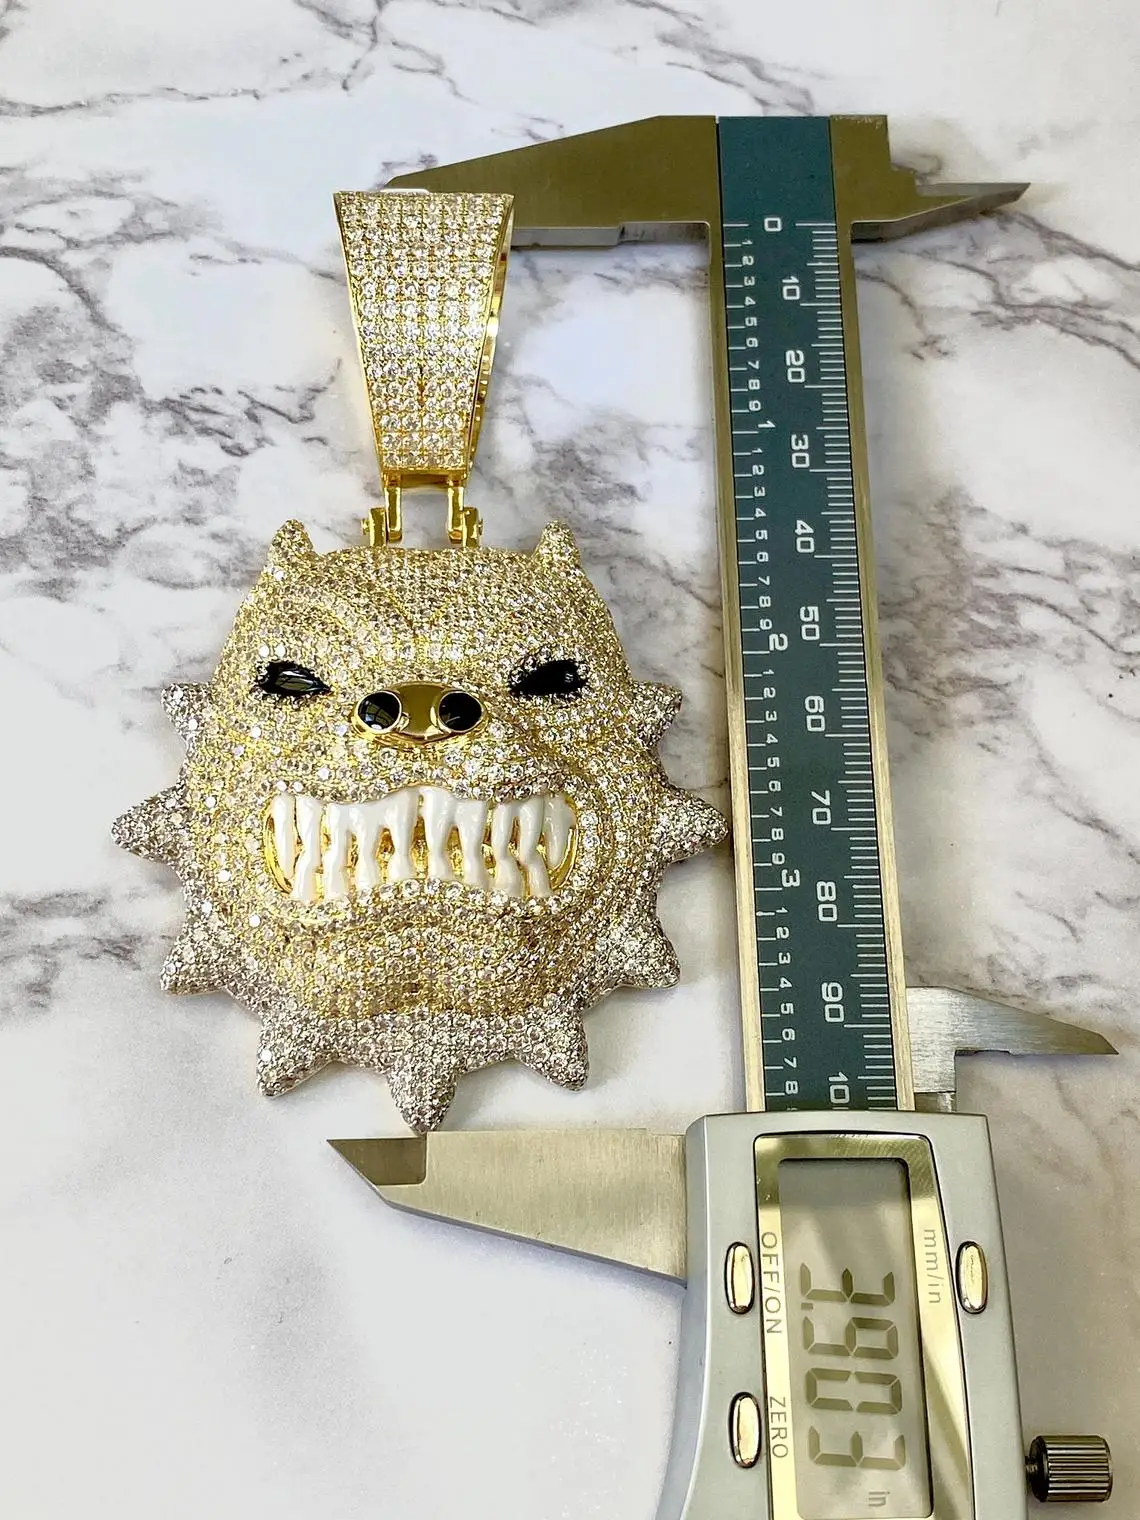 Hip Hop Fashion Jewelry 14k Gold Iced Out Full Cz Bully Dog Pendant